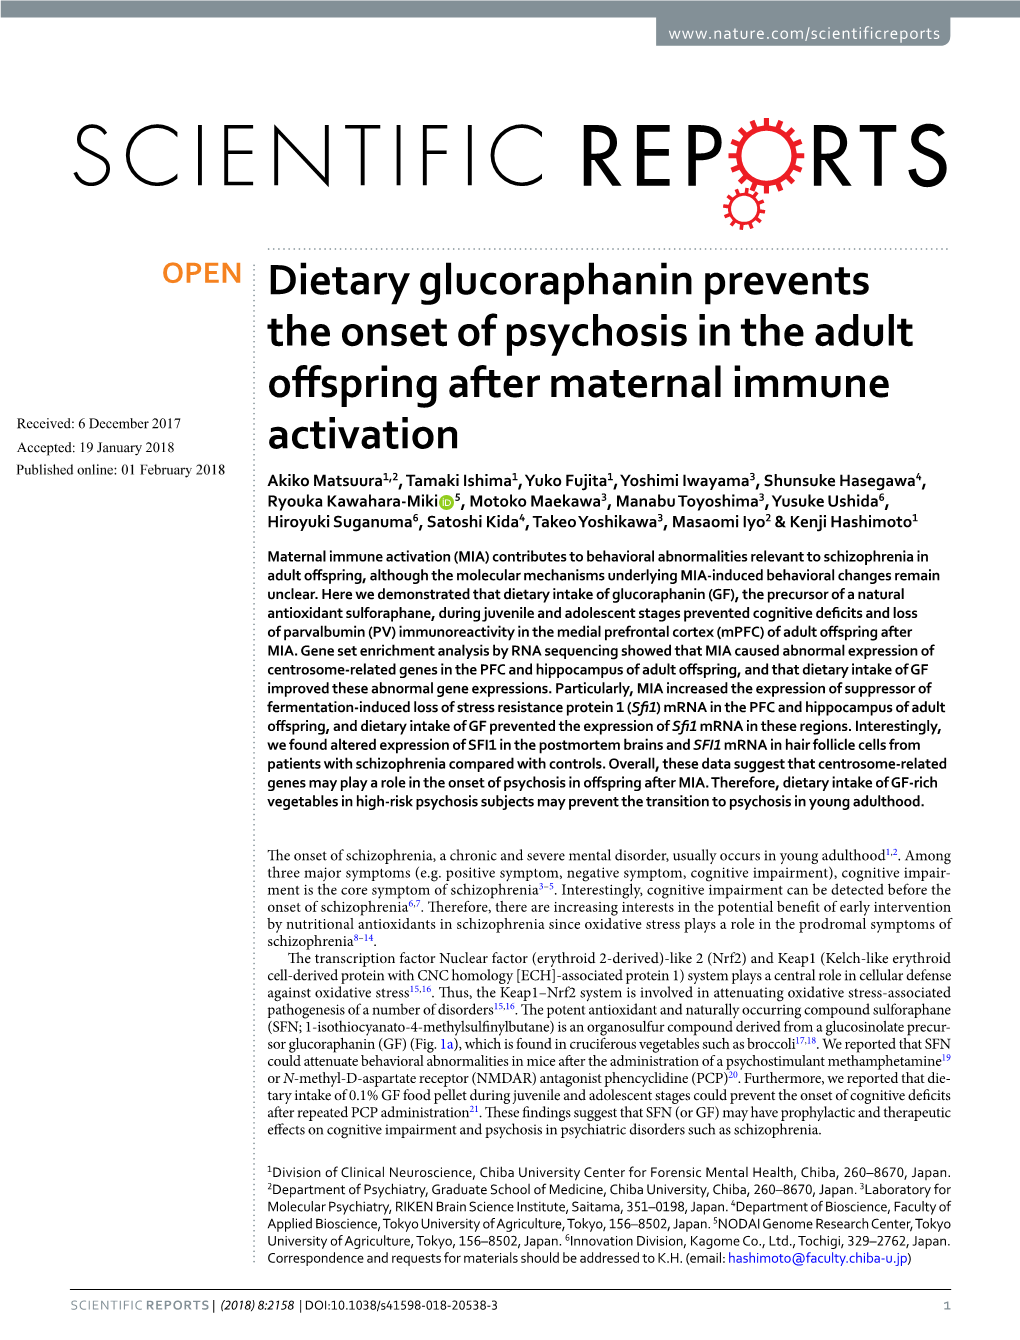 Dietary Glucoraphanin Prevents the Onset of Psychosis in the Adult